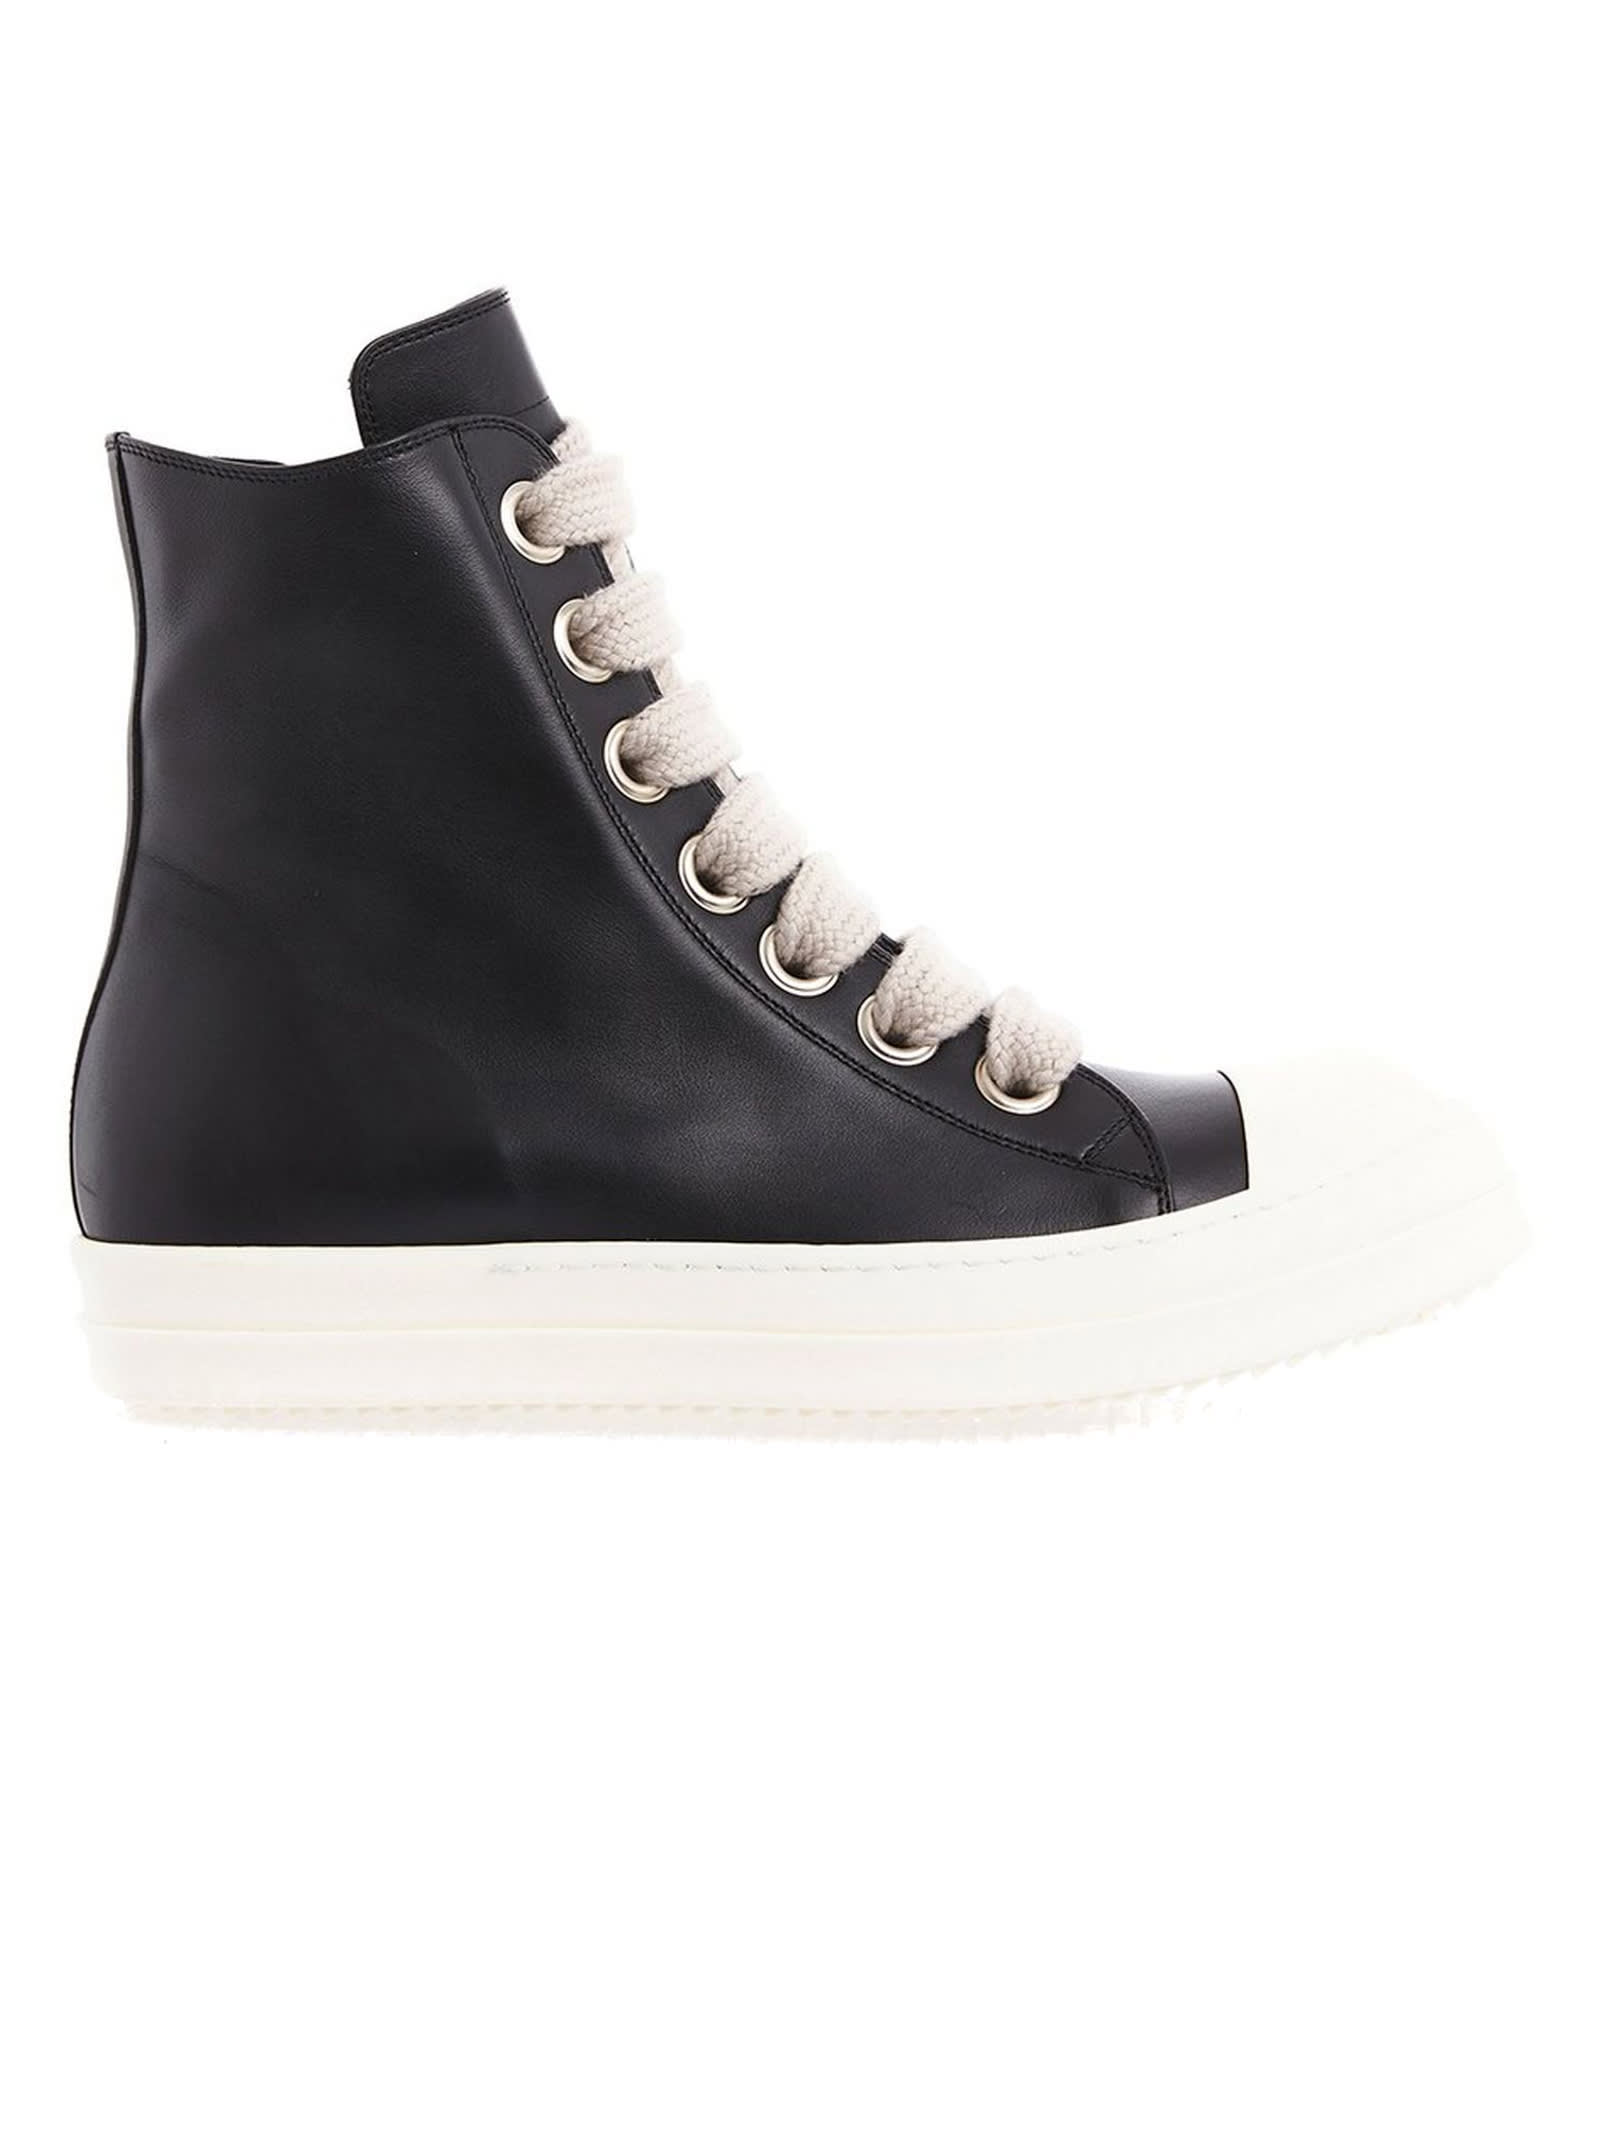 Rick Owens Black Leather Fogachine High-top Sneakers